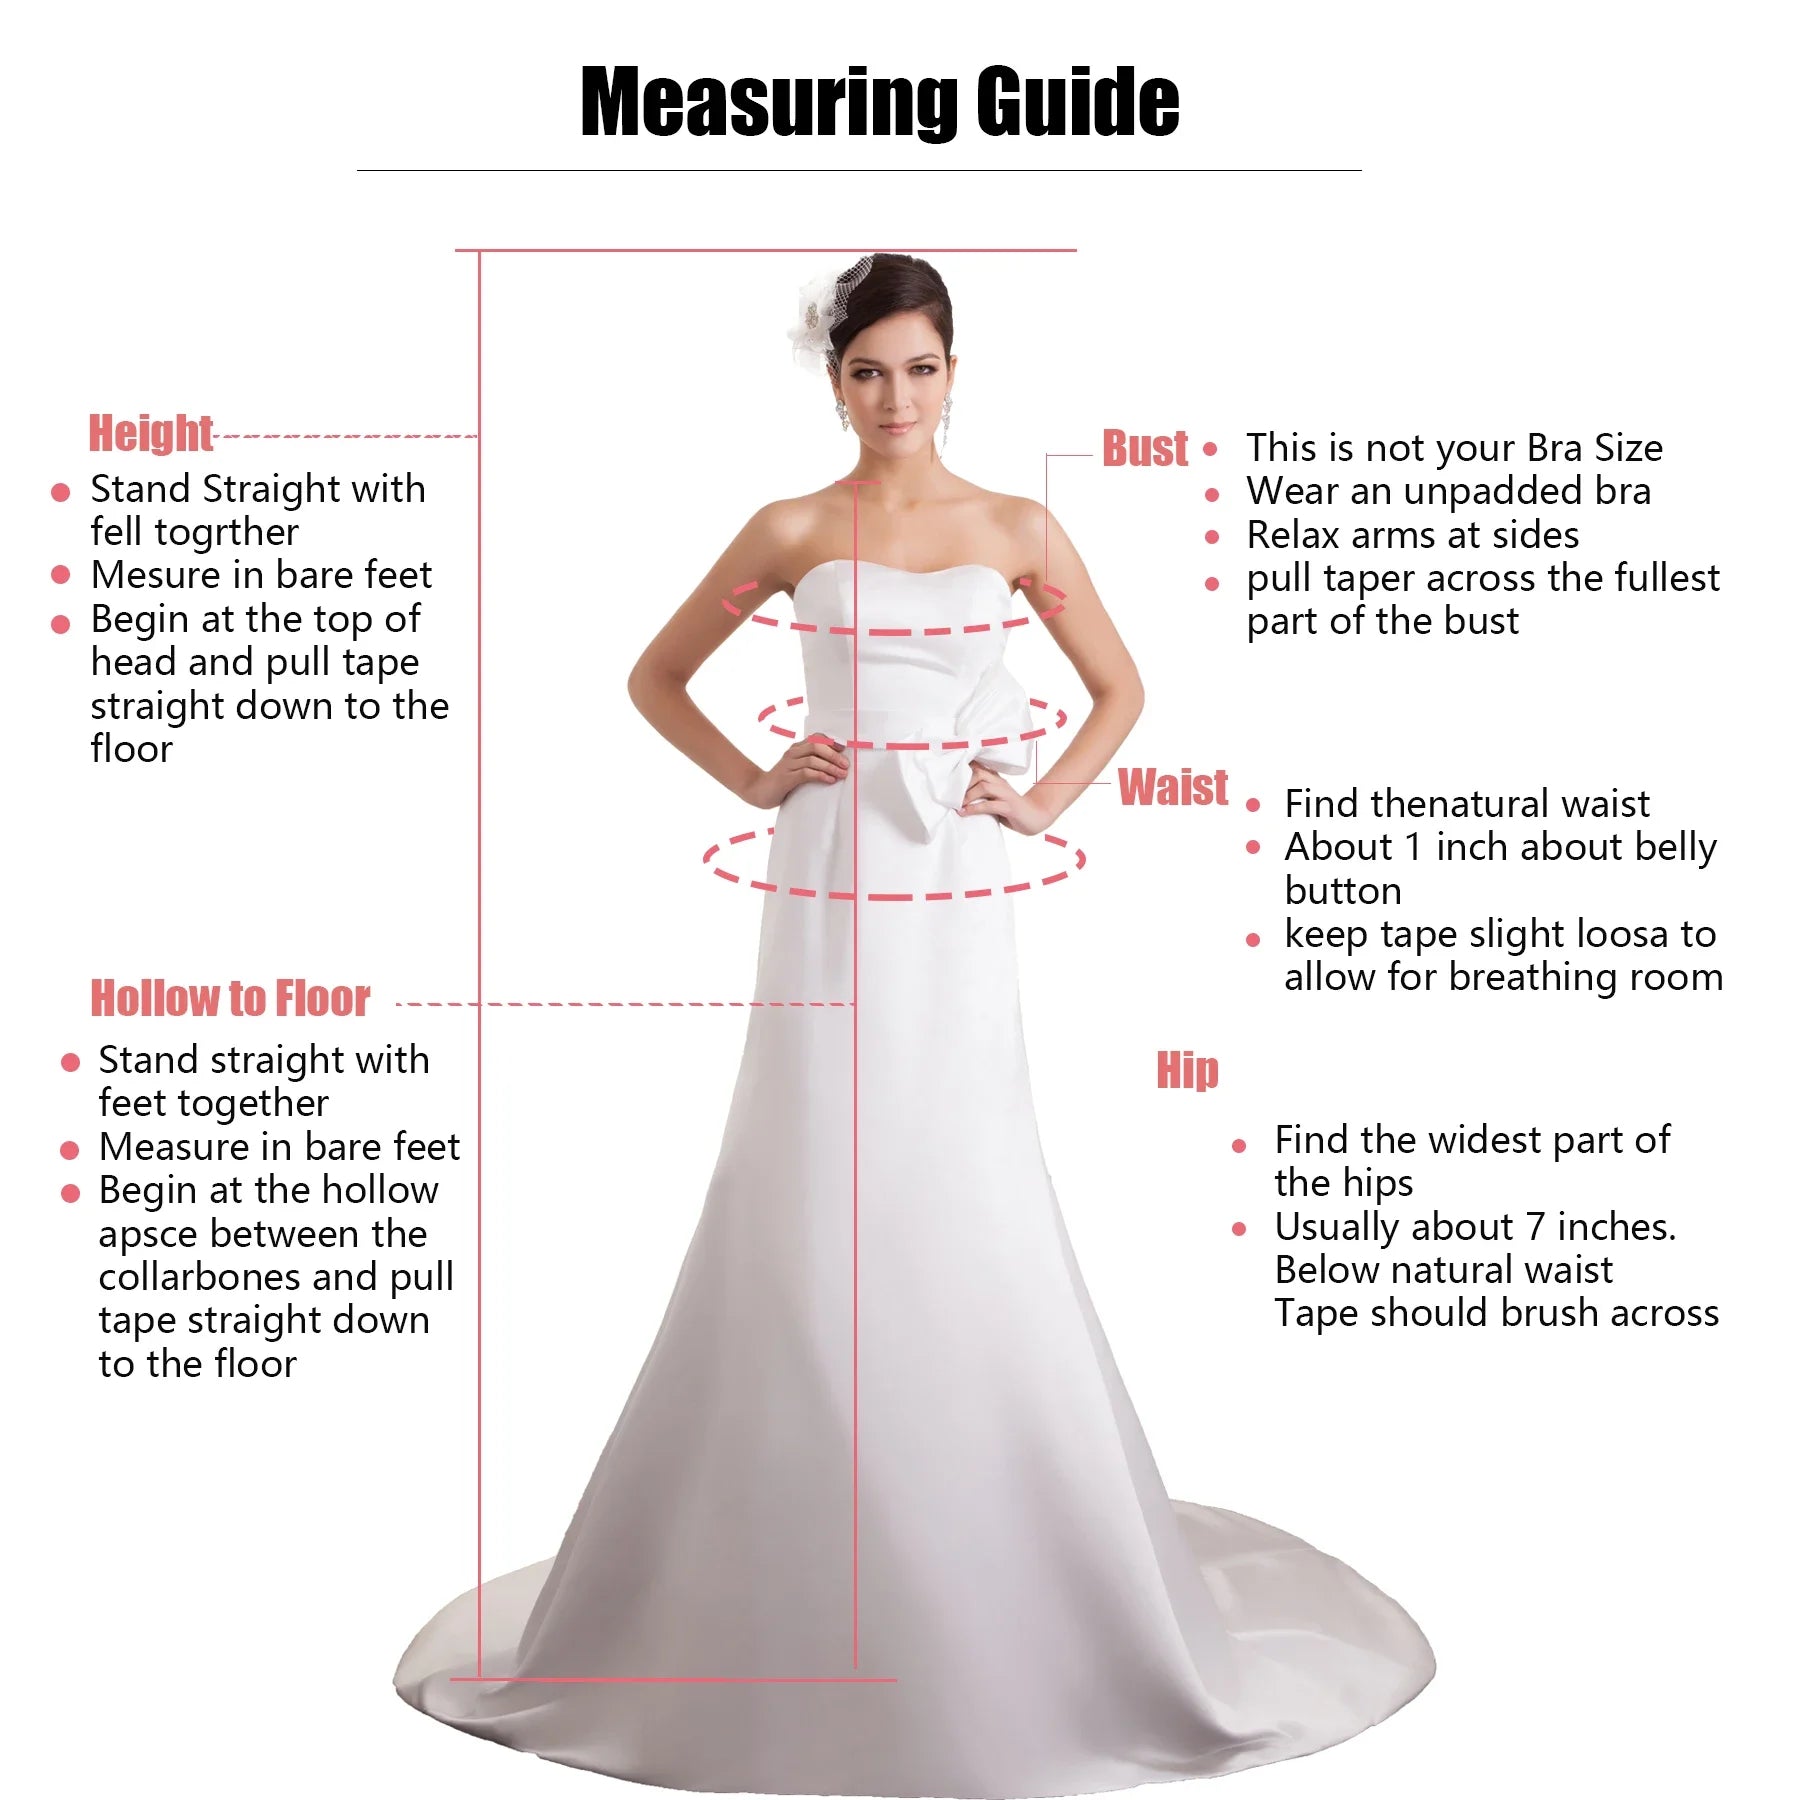 UU-Elegant Simple Siren Evening Dresses for Women with Draped Appliques, One-Shoulder Prom Dresses luxury dress  evening dresses